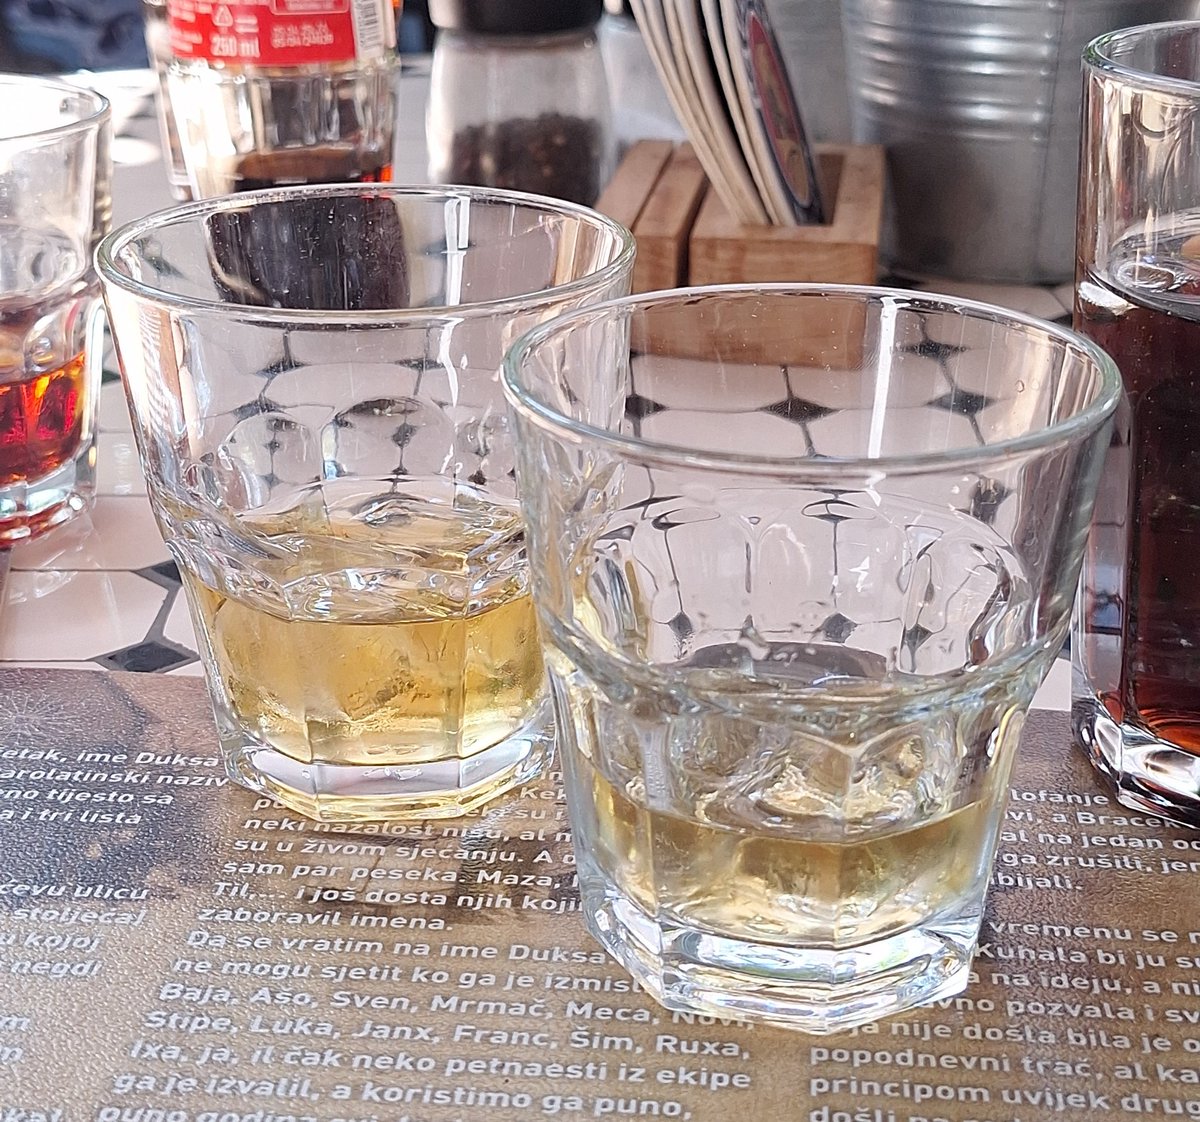 so much about needing a shot jfjdhf we went into a restaurant and the waitress accidentally brought two ballantines hdhshd